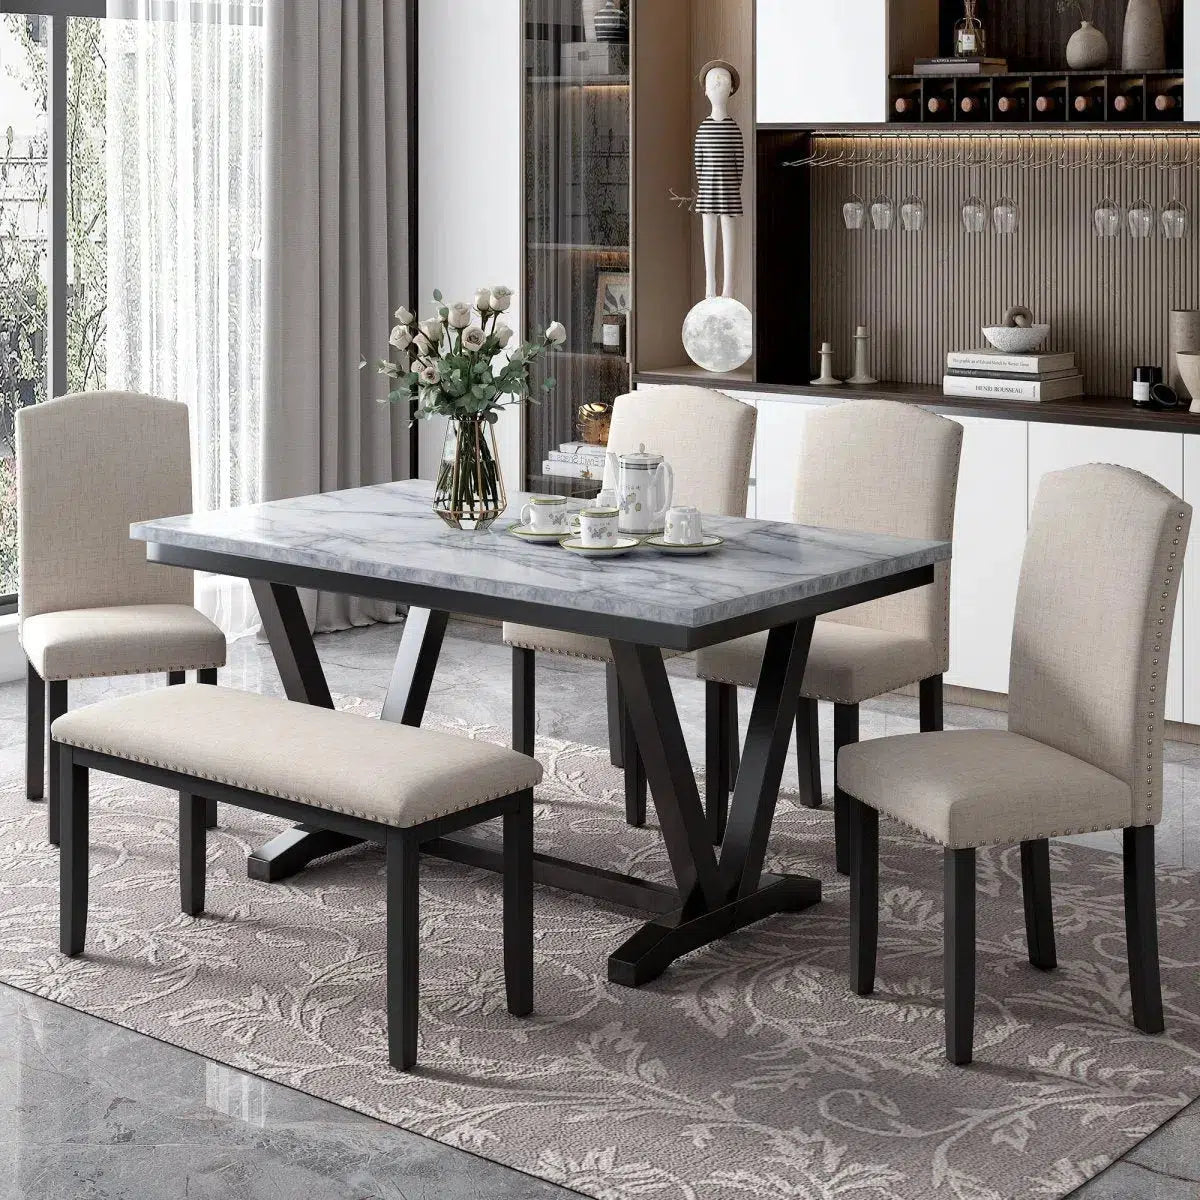 Modern Style 6-piece Dining Table with 4 Chairs & 1 Bench, Table with Marbled Veneers Tabletop and V-shaped Table Legs Home Decor by Design